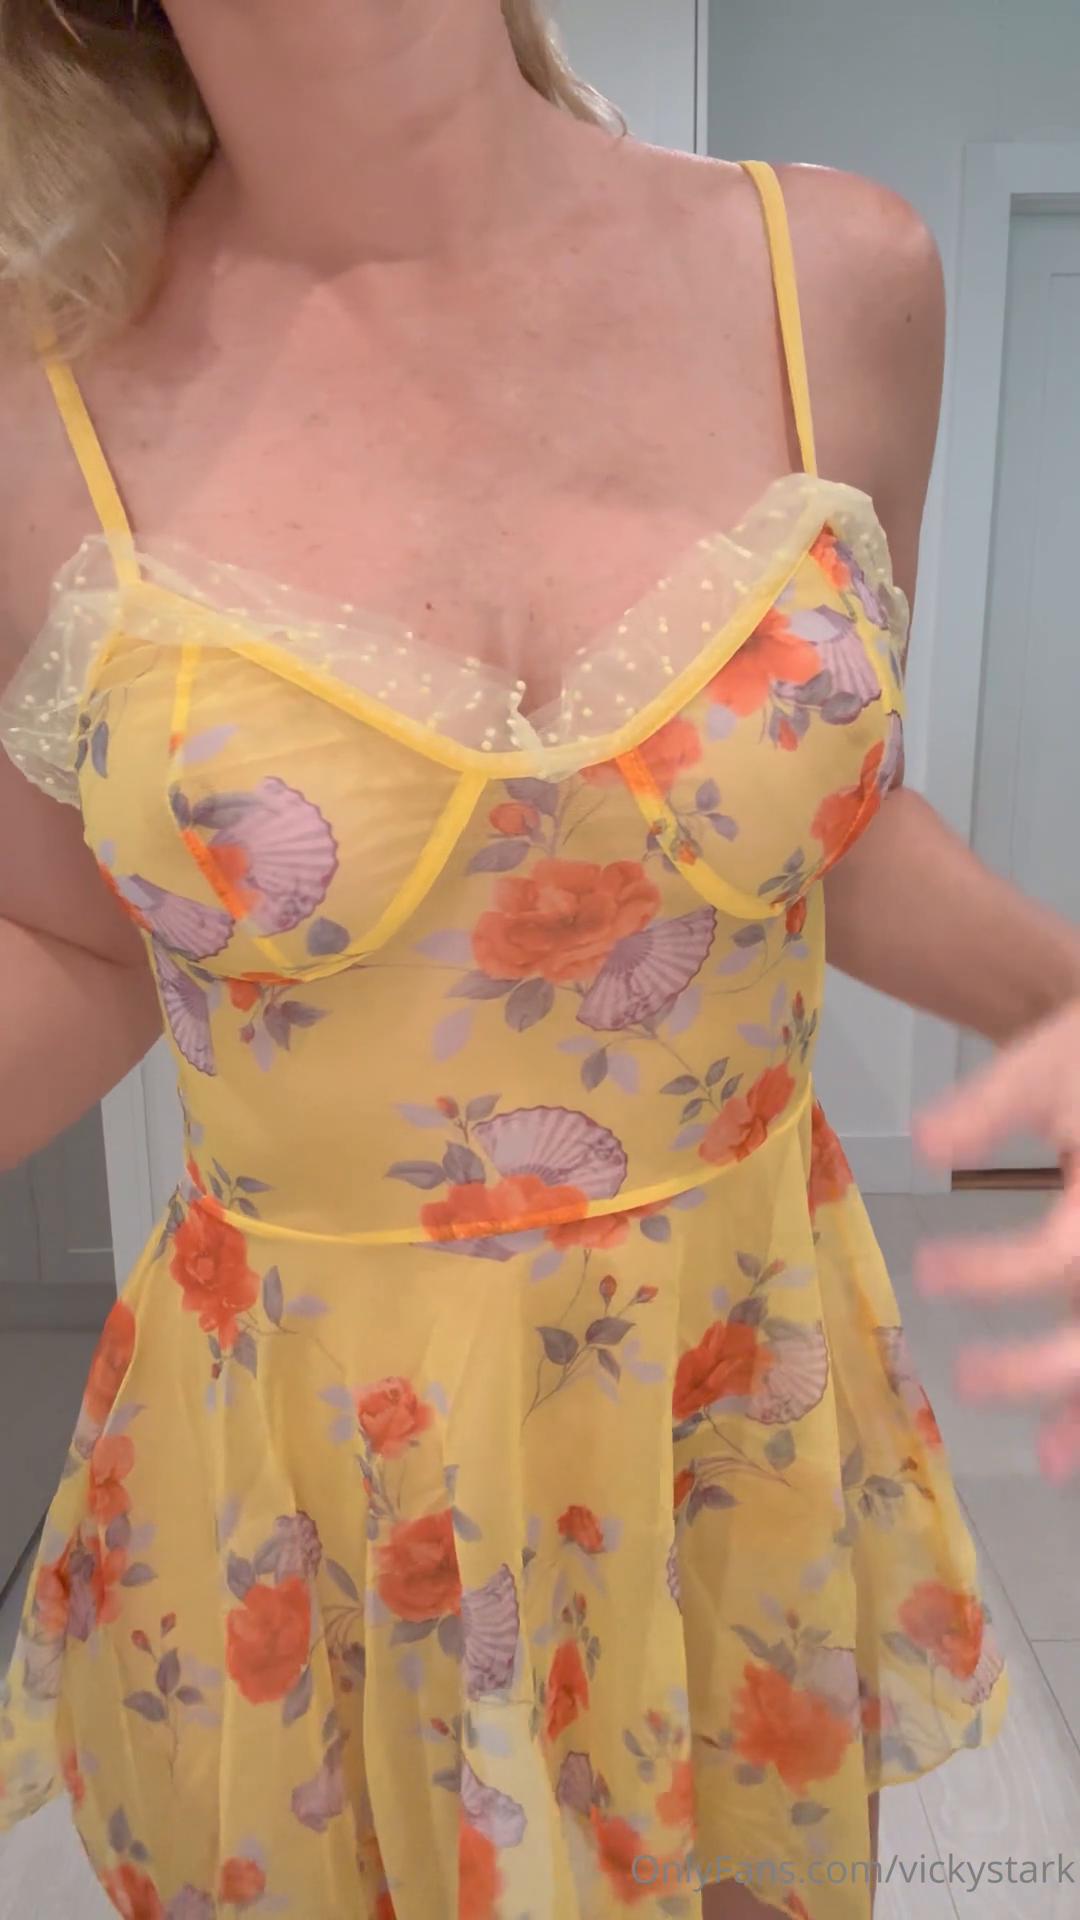 vicky stark nude girl next door try on onlyfans video leaked fcoshw